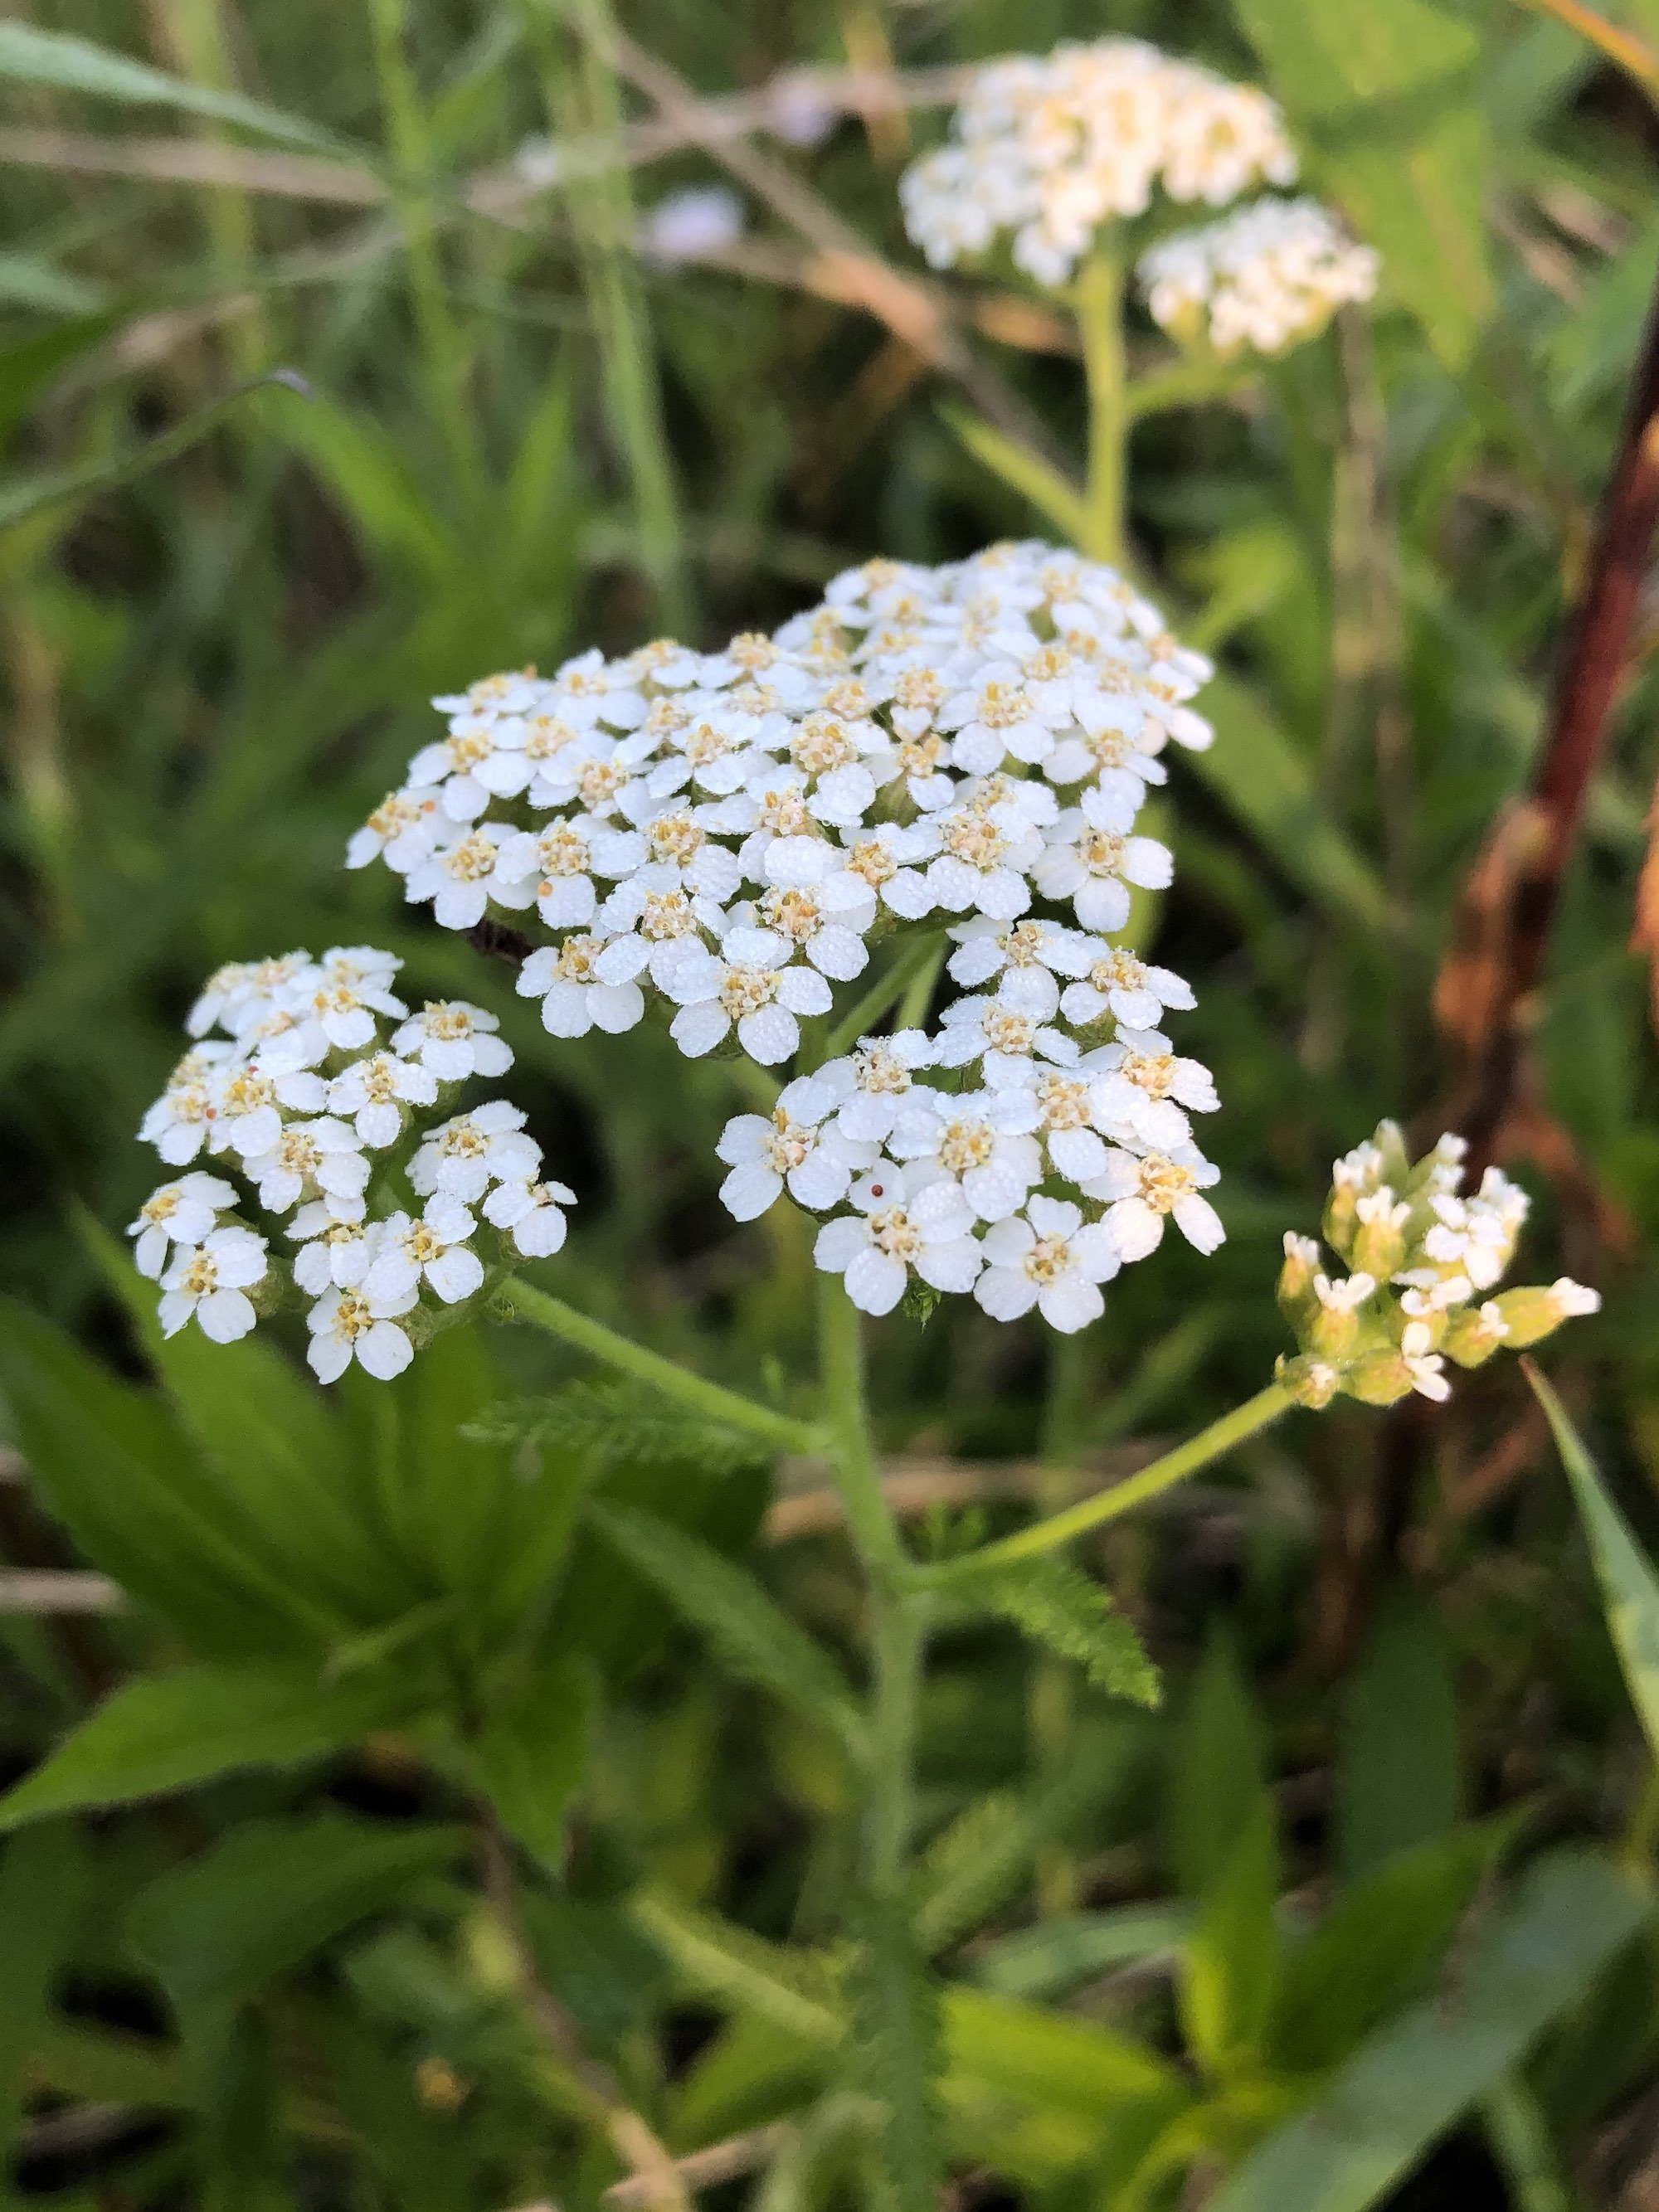 Common Yarrow on shore of Marion Dunn Pond on June 16, 2020.